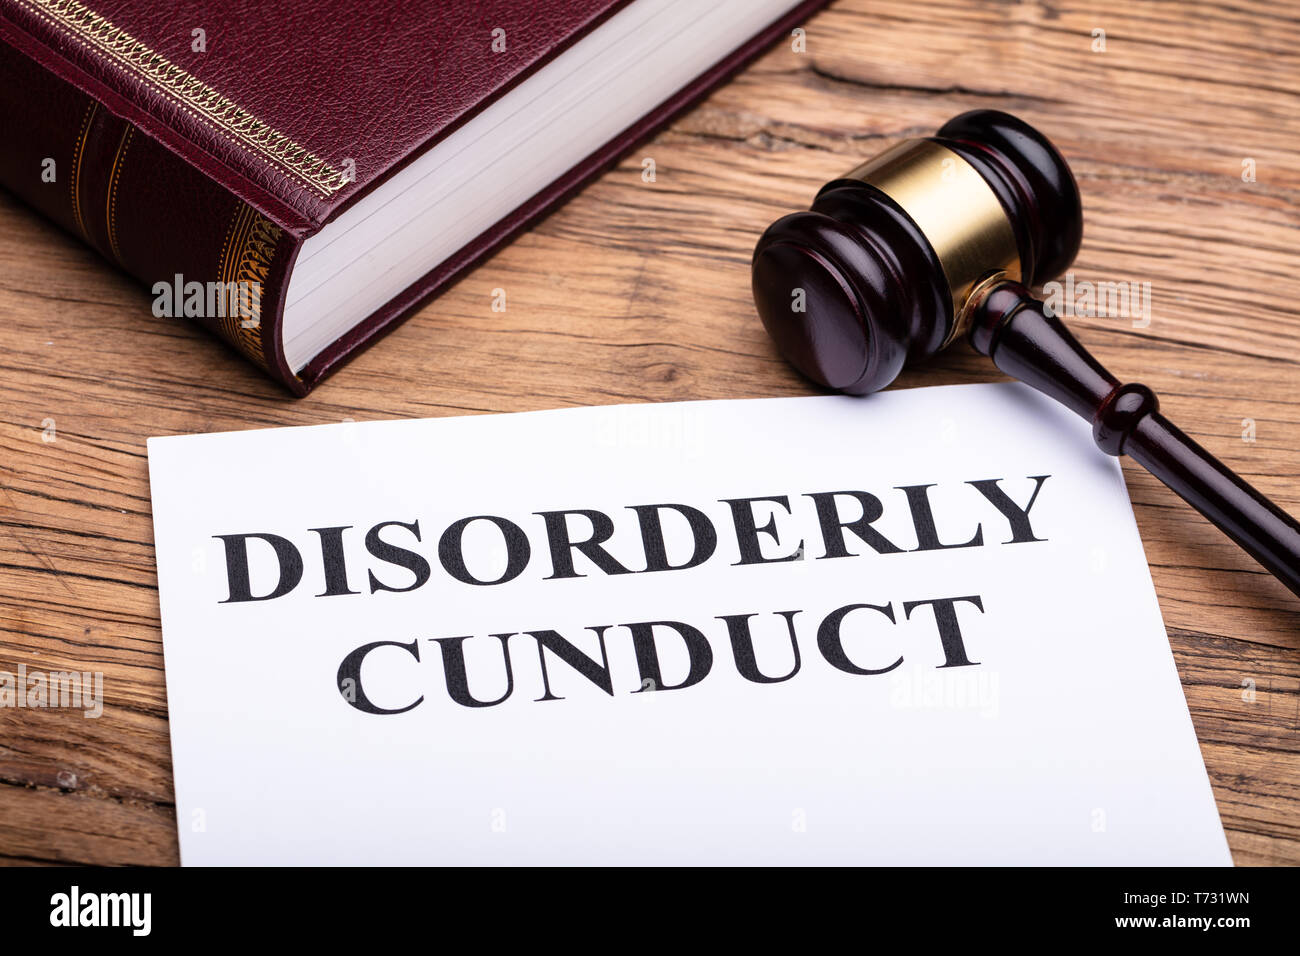 Disorderly Conduct Text On Legal Document Near Gavel And Law Book Over Wooden Desk Stock Photo